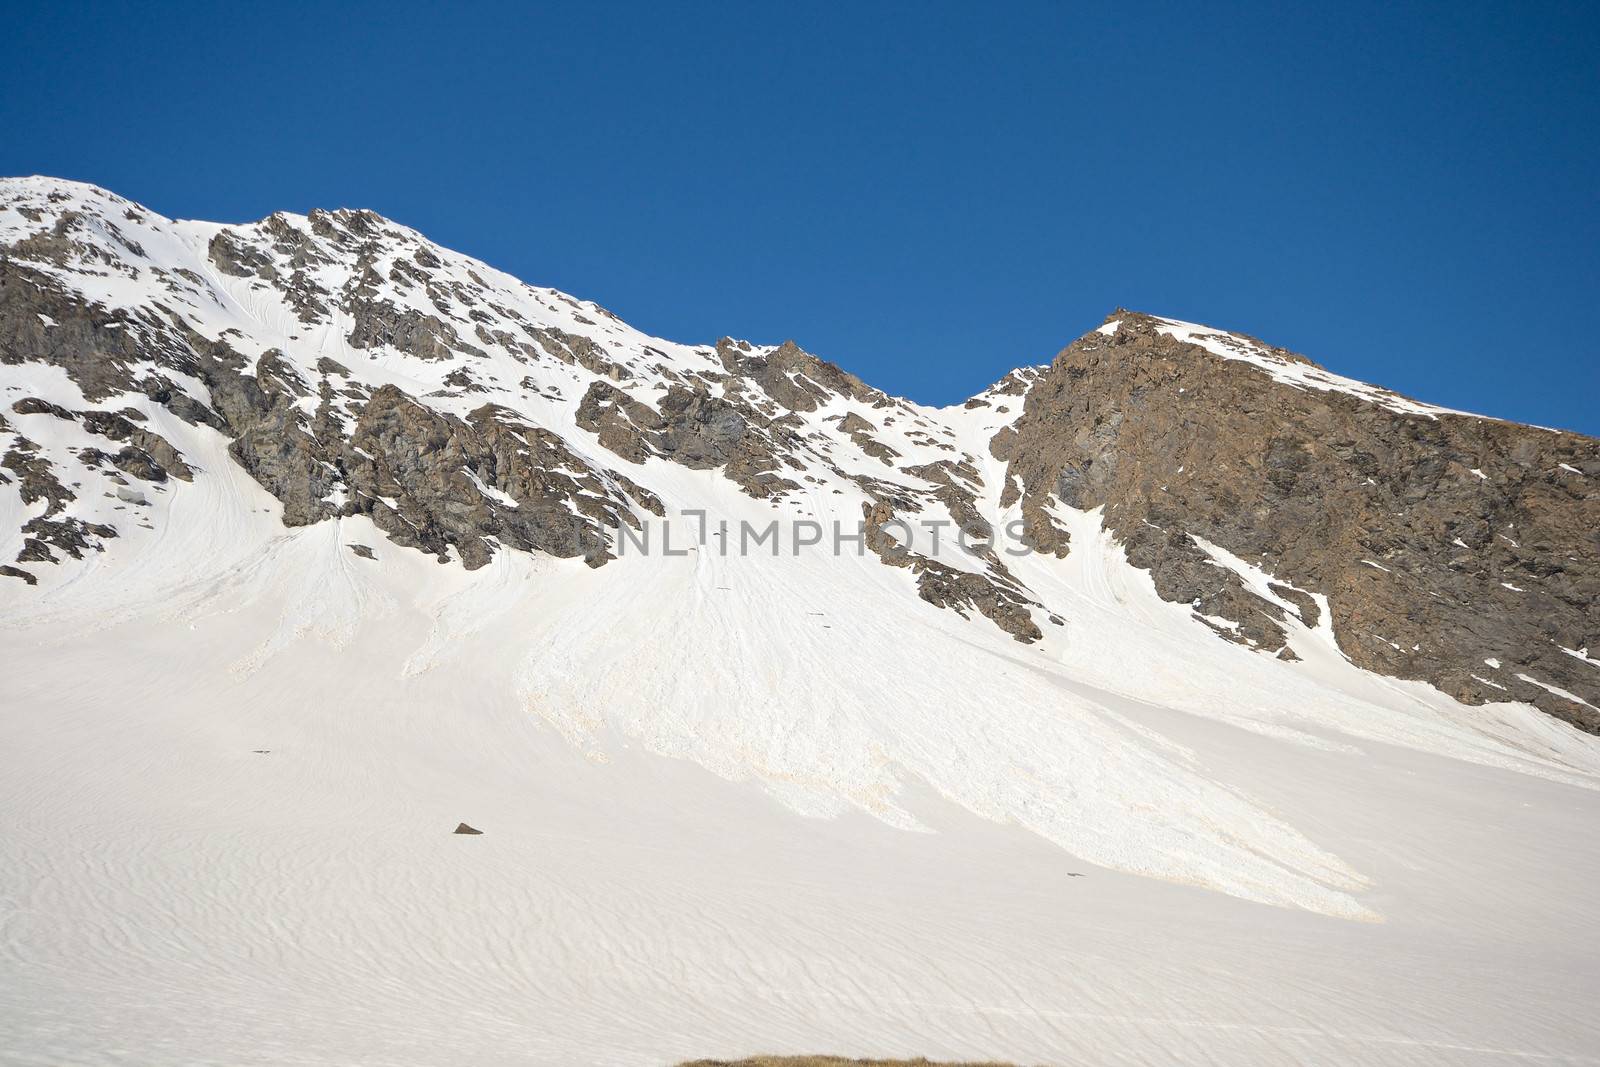 Spring avalanche fans caused by heat and snowdrift on the ridges at high altitude